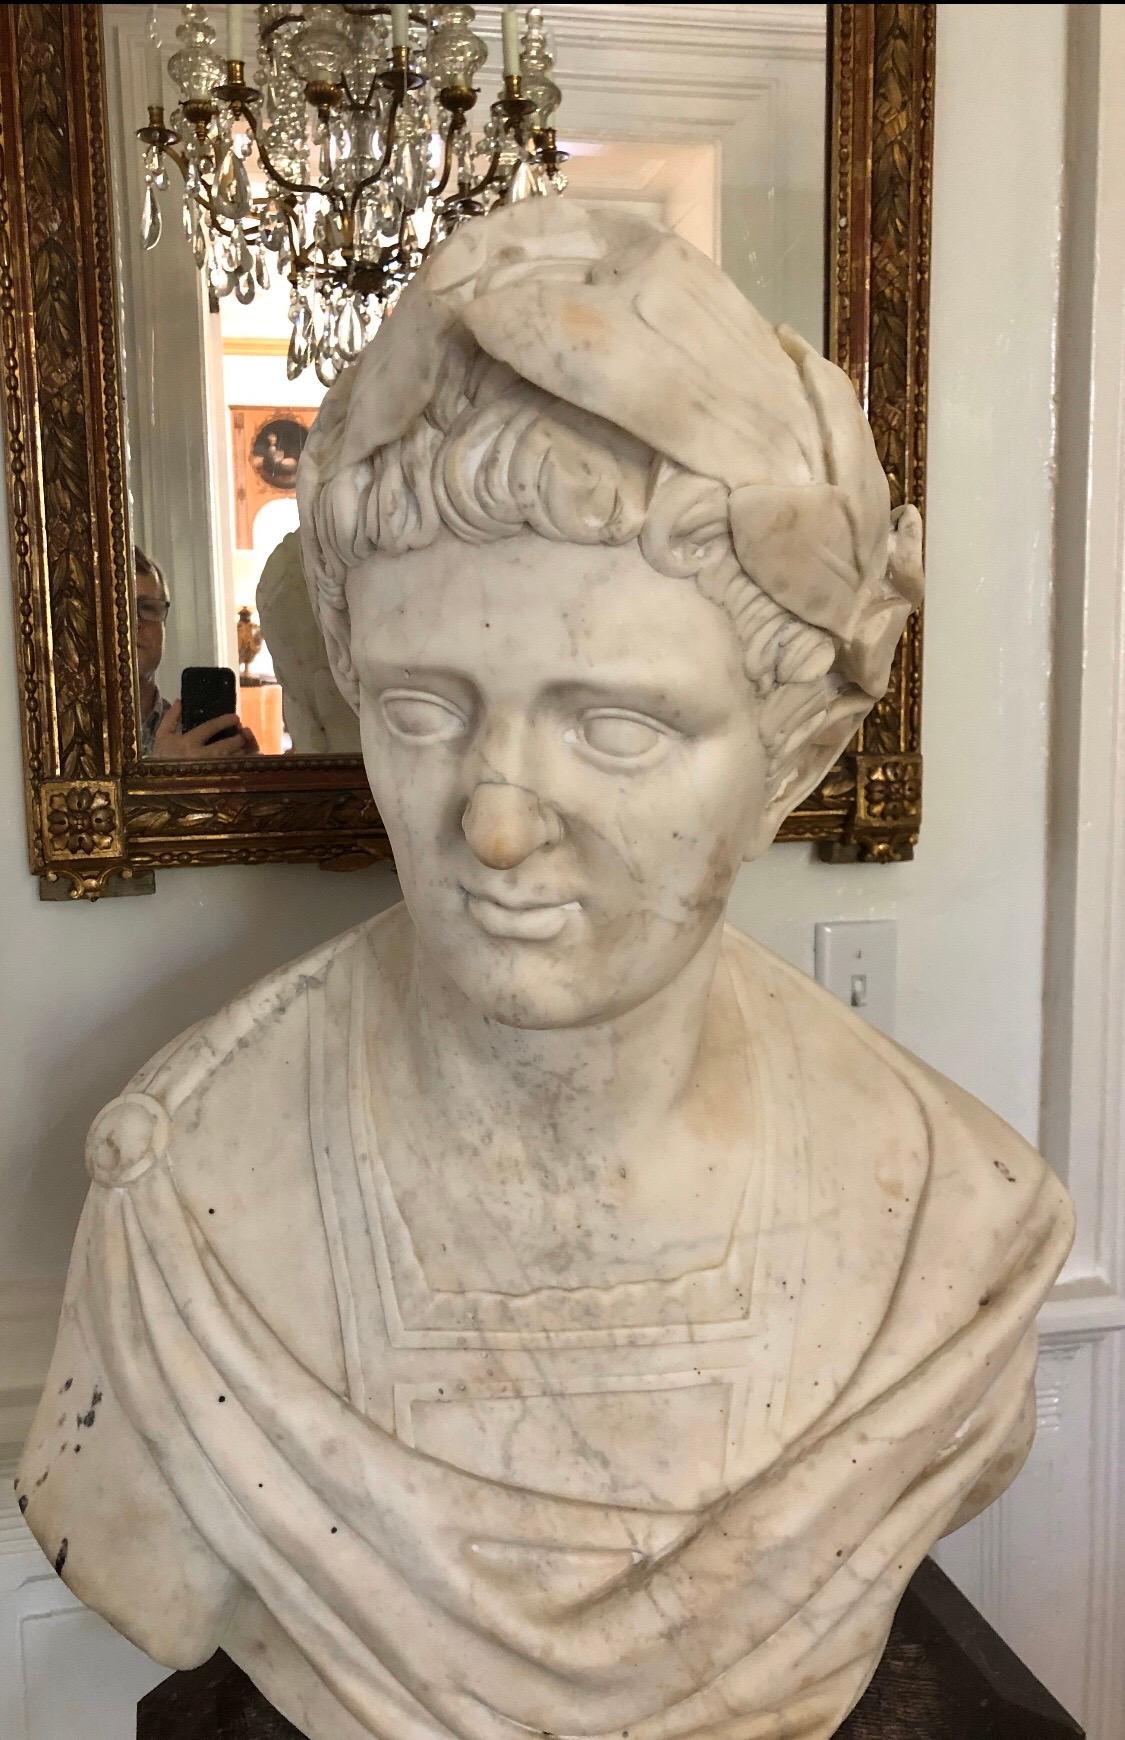 This Classical Roman marble bust of a Caesar is life-size with fine detailed carving.